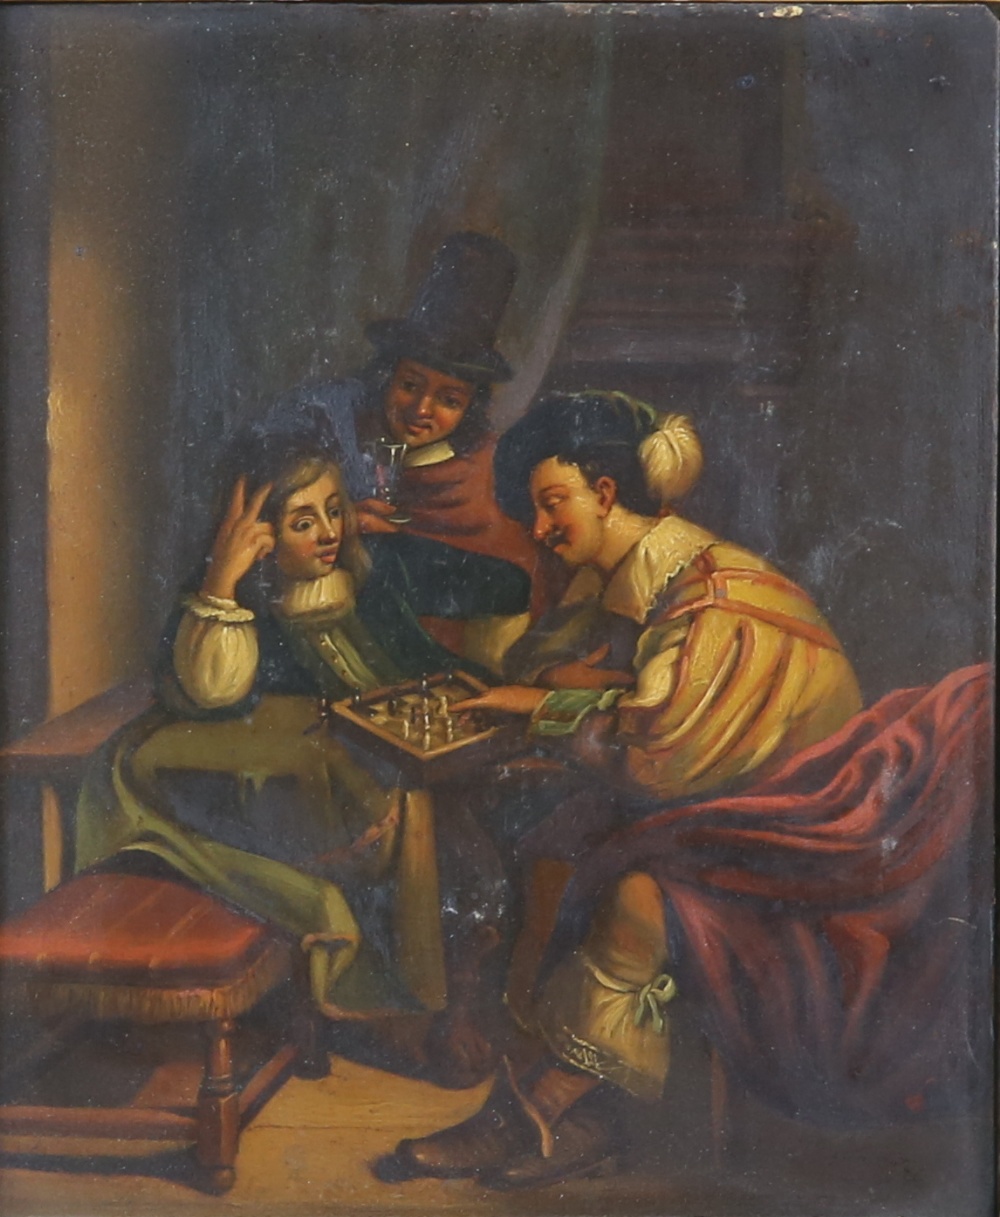 19th century oil, figures playing chess. 19.5 x 16.5cm. Framed. Frame in poor conditionSome wear and